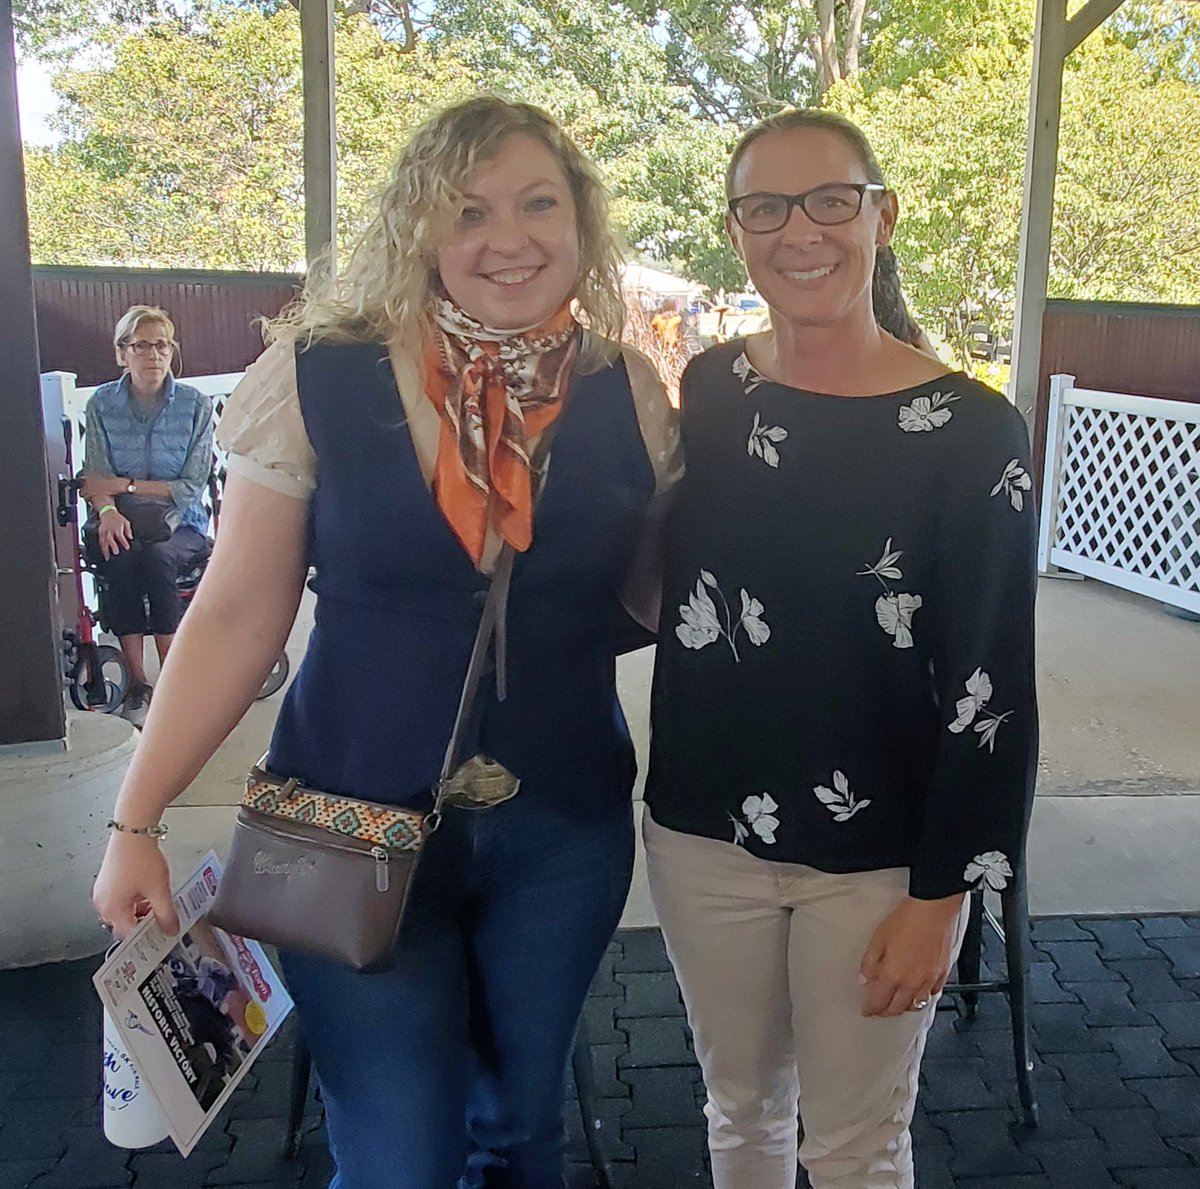 I thoroughly enjoyed listening to @jenaantonucci and Katie Miranda talk about HorseOlogy, Inc. (horseologyinc.com). I learned so much in a short amount of time at @KyHorsePark's EquineED lecture series. You both are refreshing and relatable!